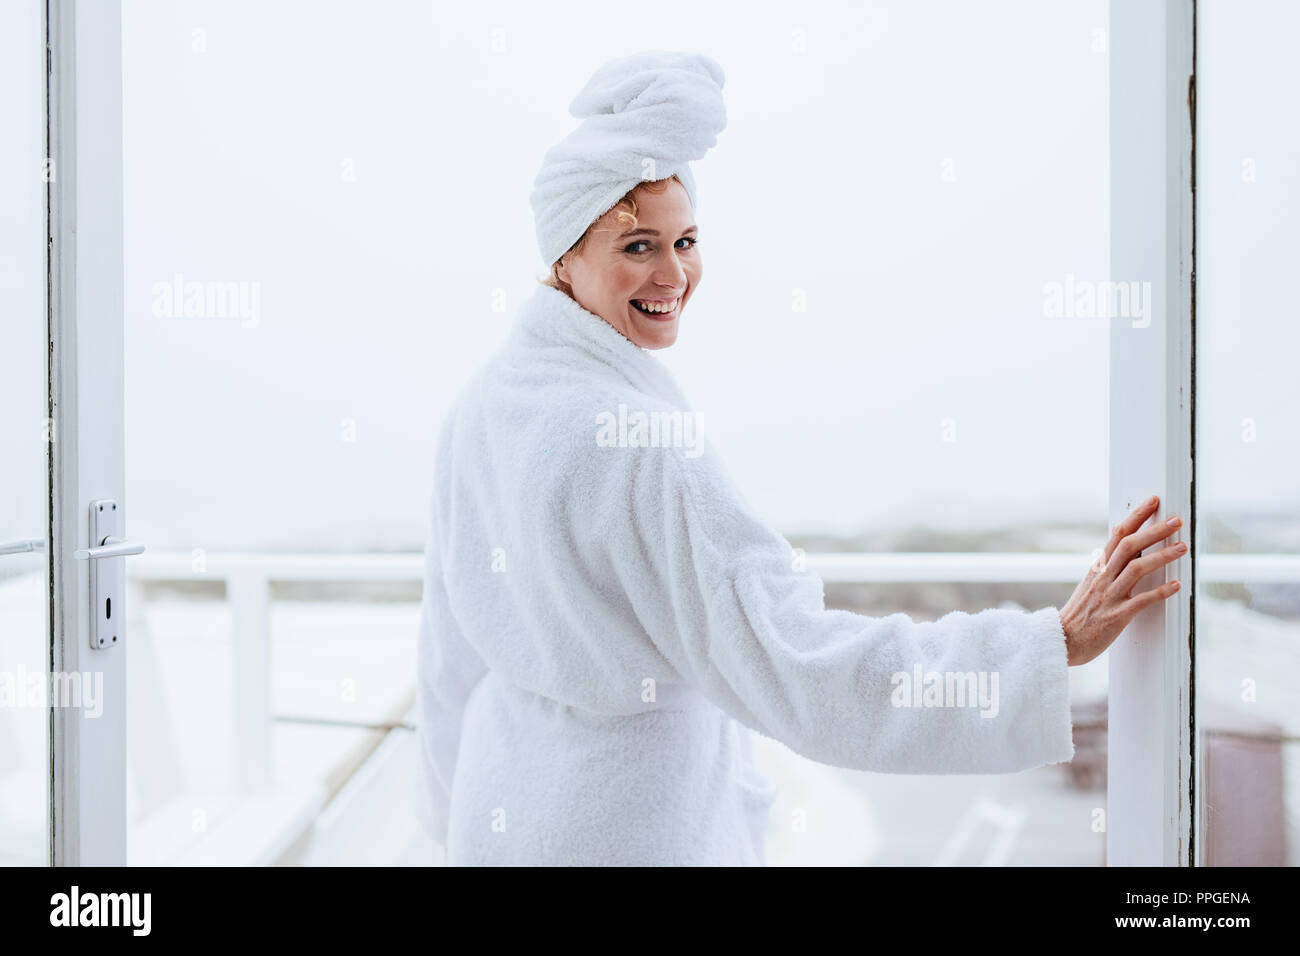 Woman wrapped in towel, rear view - Stock Image - F003/2579 - Science Photo  Library